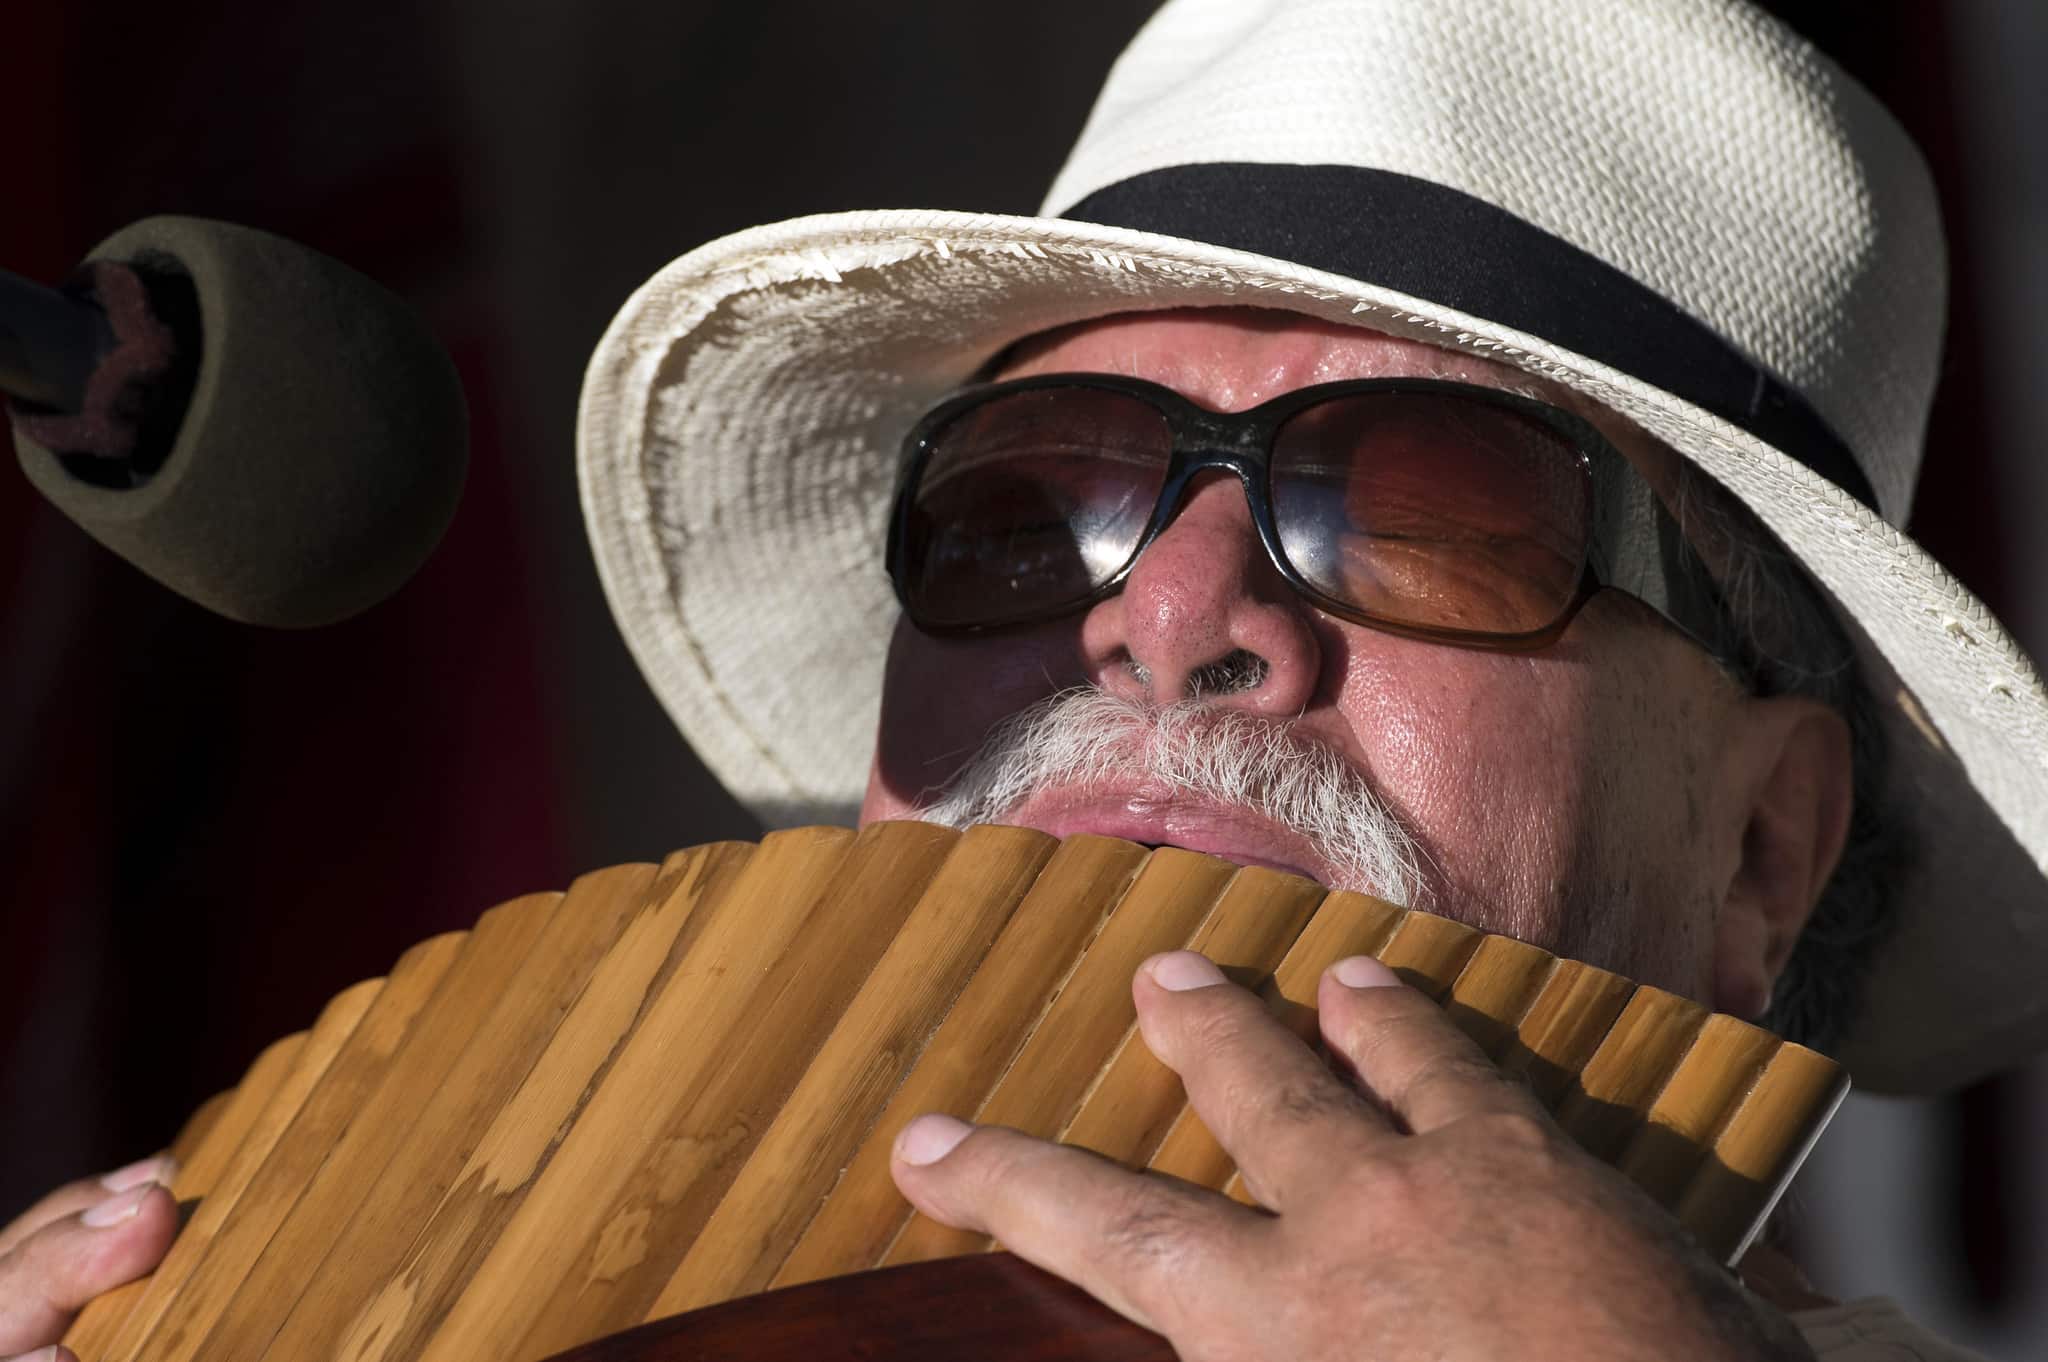 How to play the panpipe